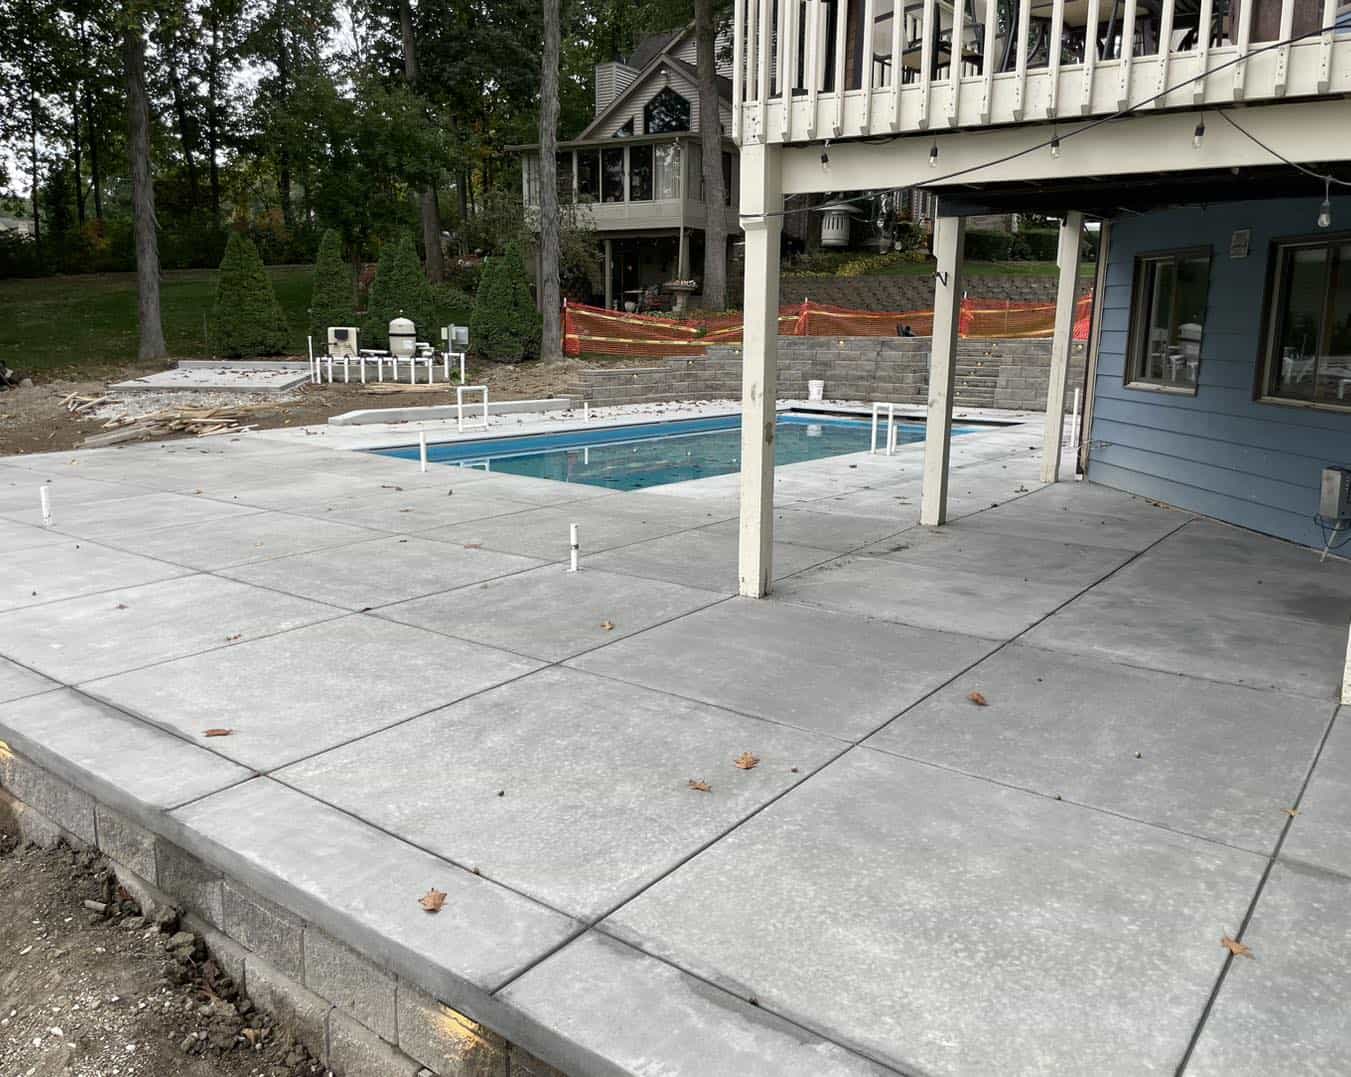 A concrete patio with a pool in the background.